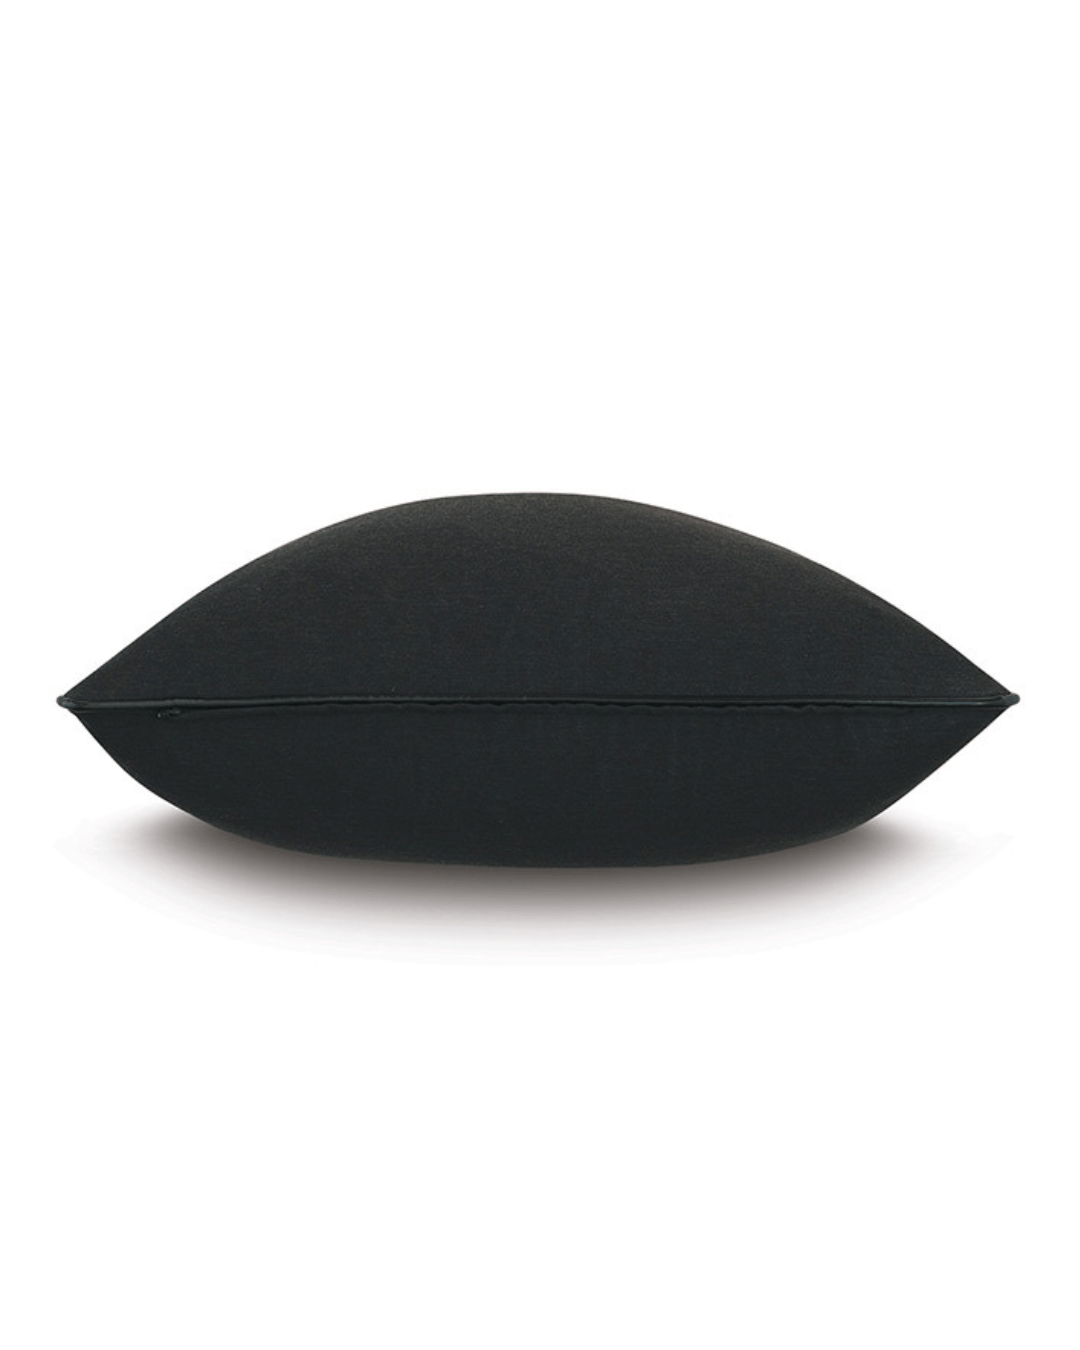 A Ban Solid Black Pillow by Eastern Accents, oval-shaped with a seam along its edge, displayed in Arizona style against a white background.